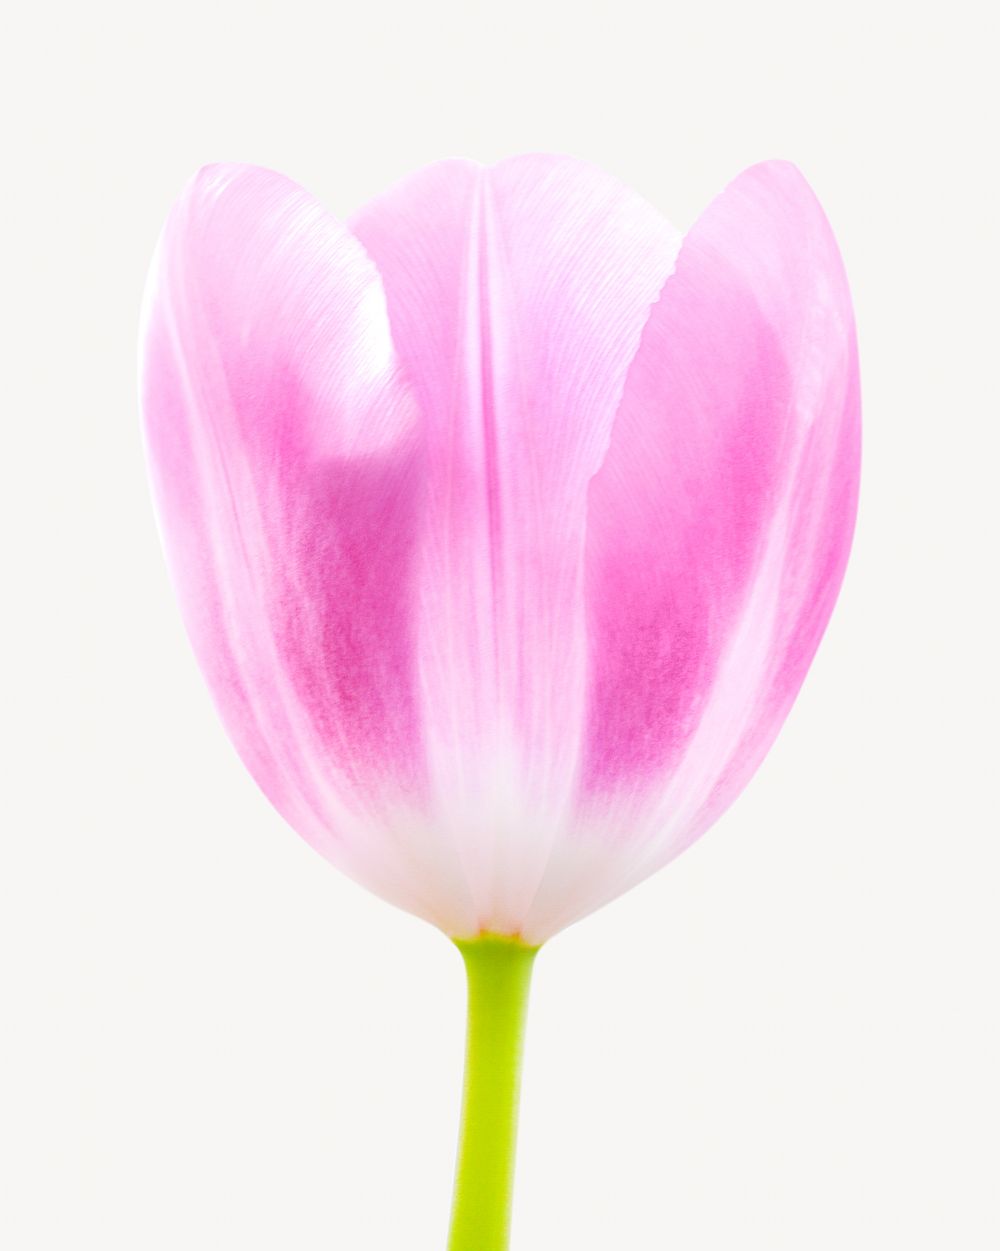 Pink flower tulip  isolated image on white